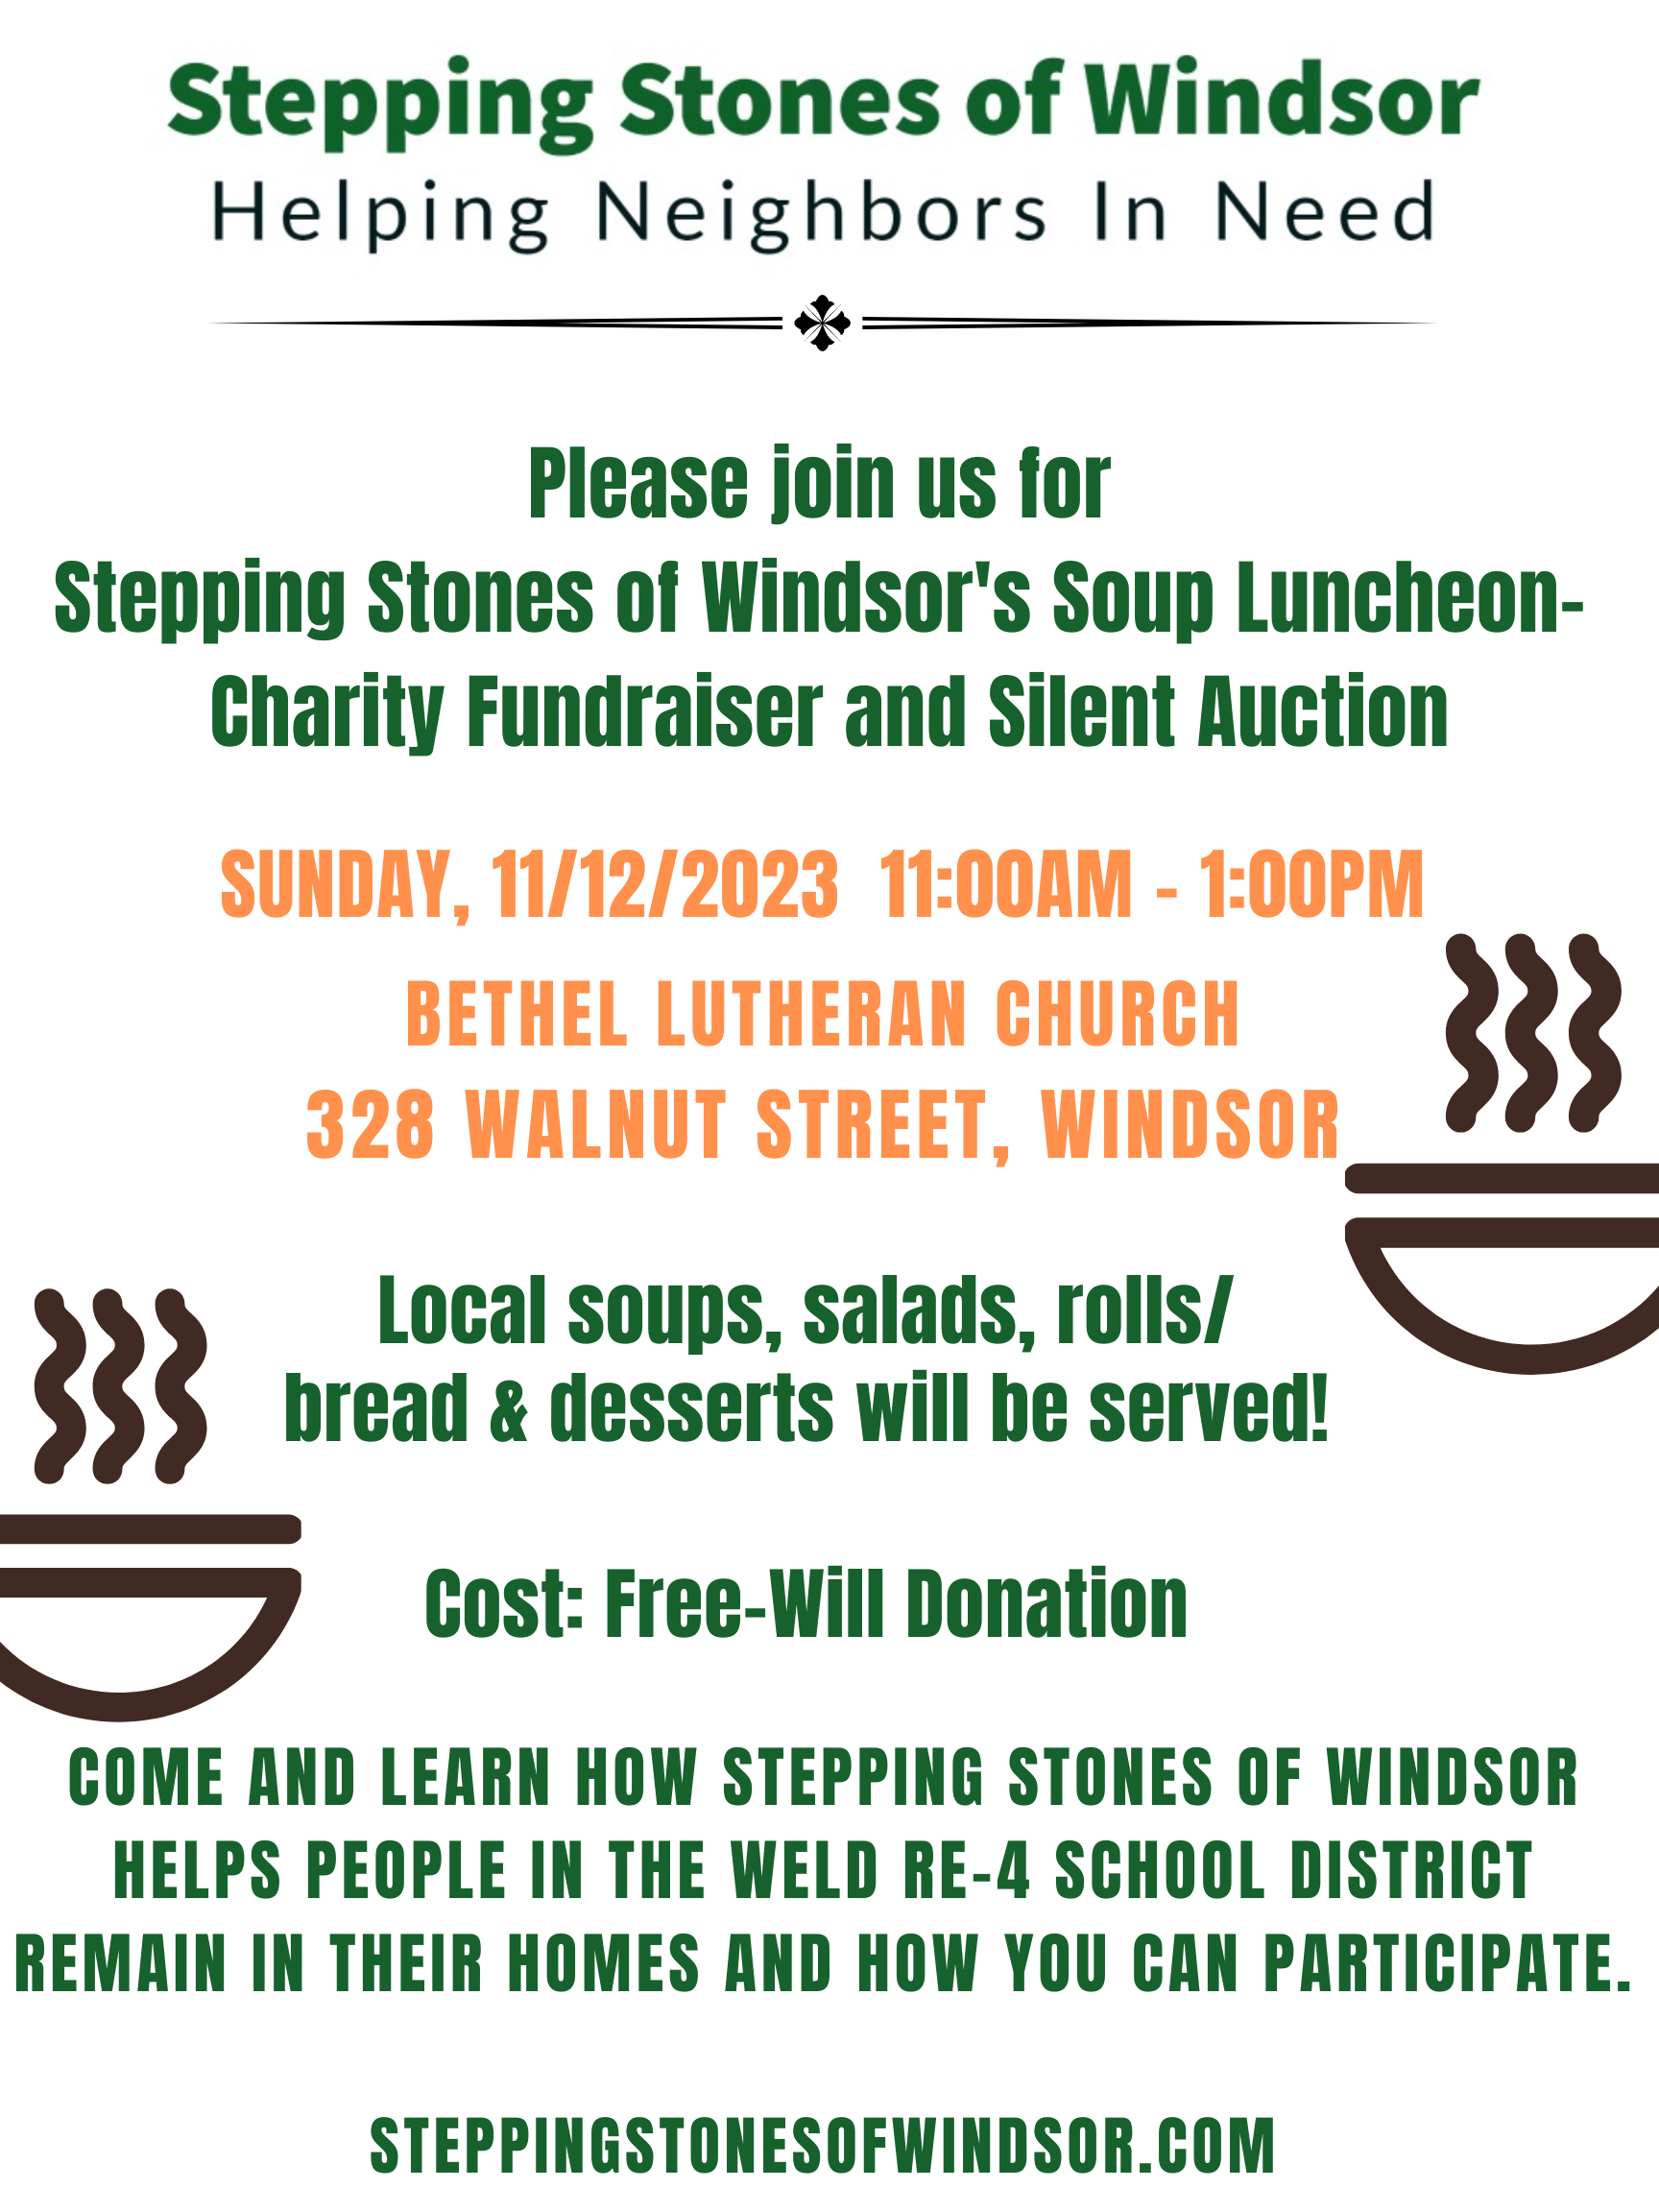 fall 2023 stepping stones soup luncheon